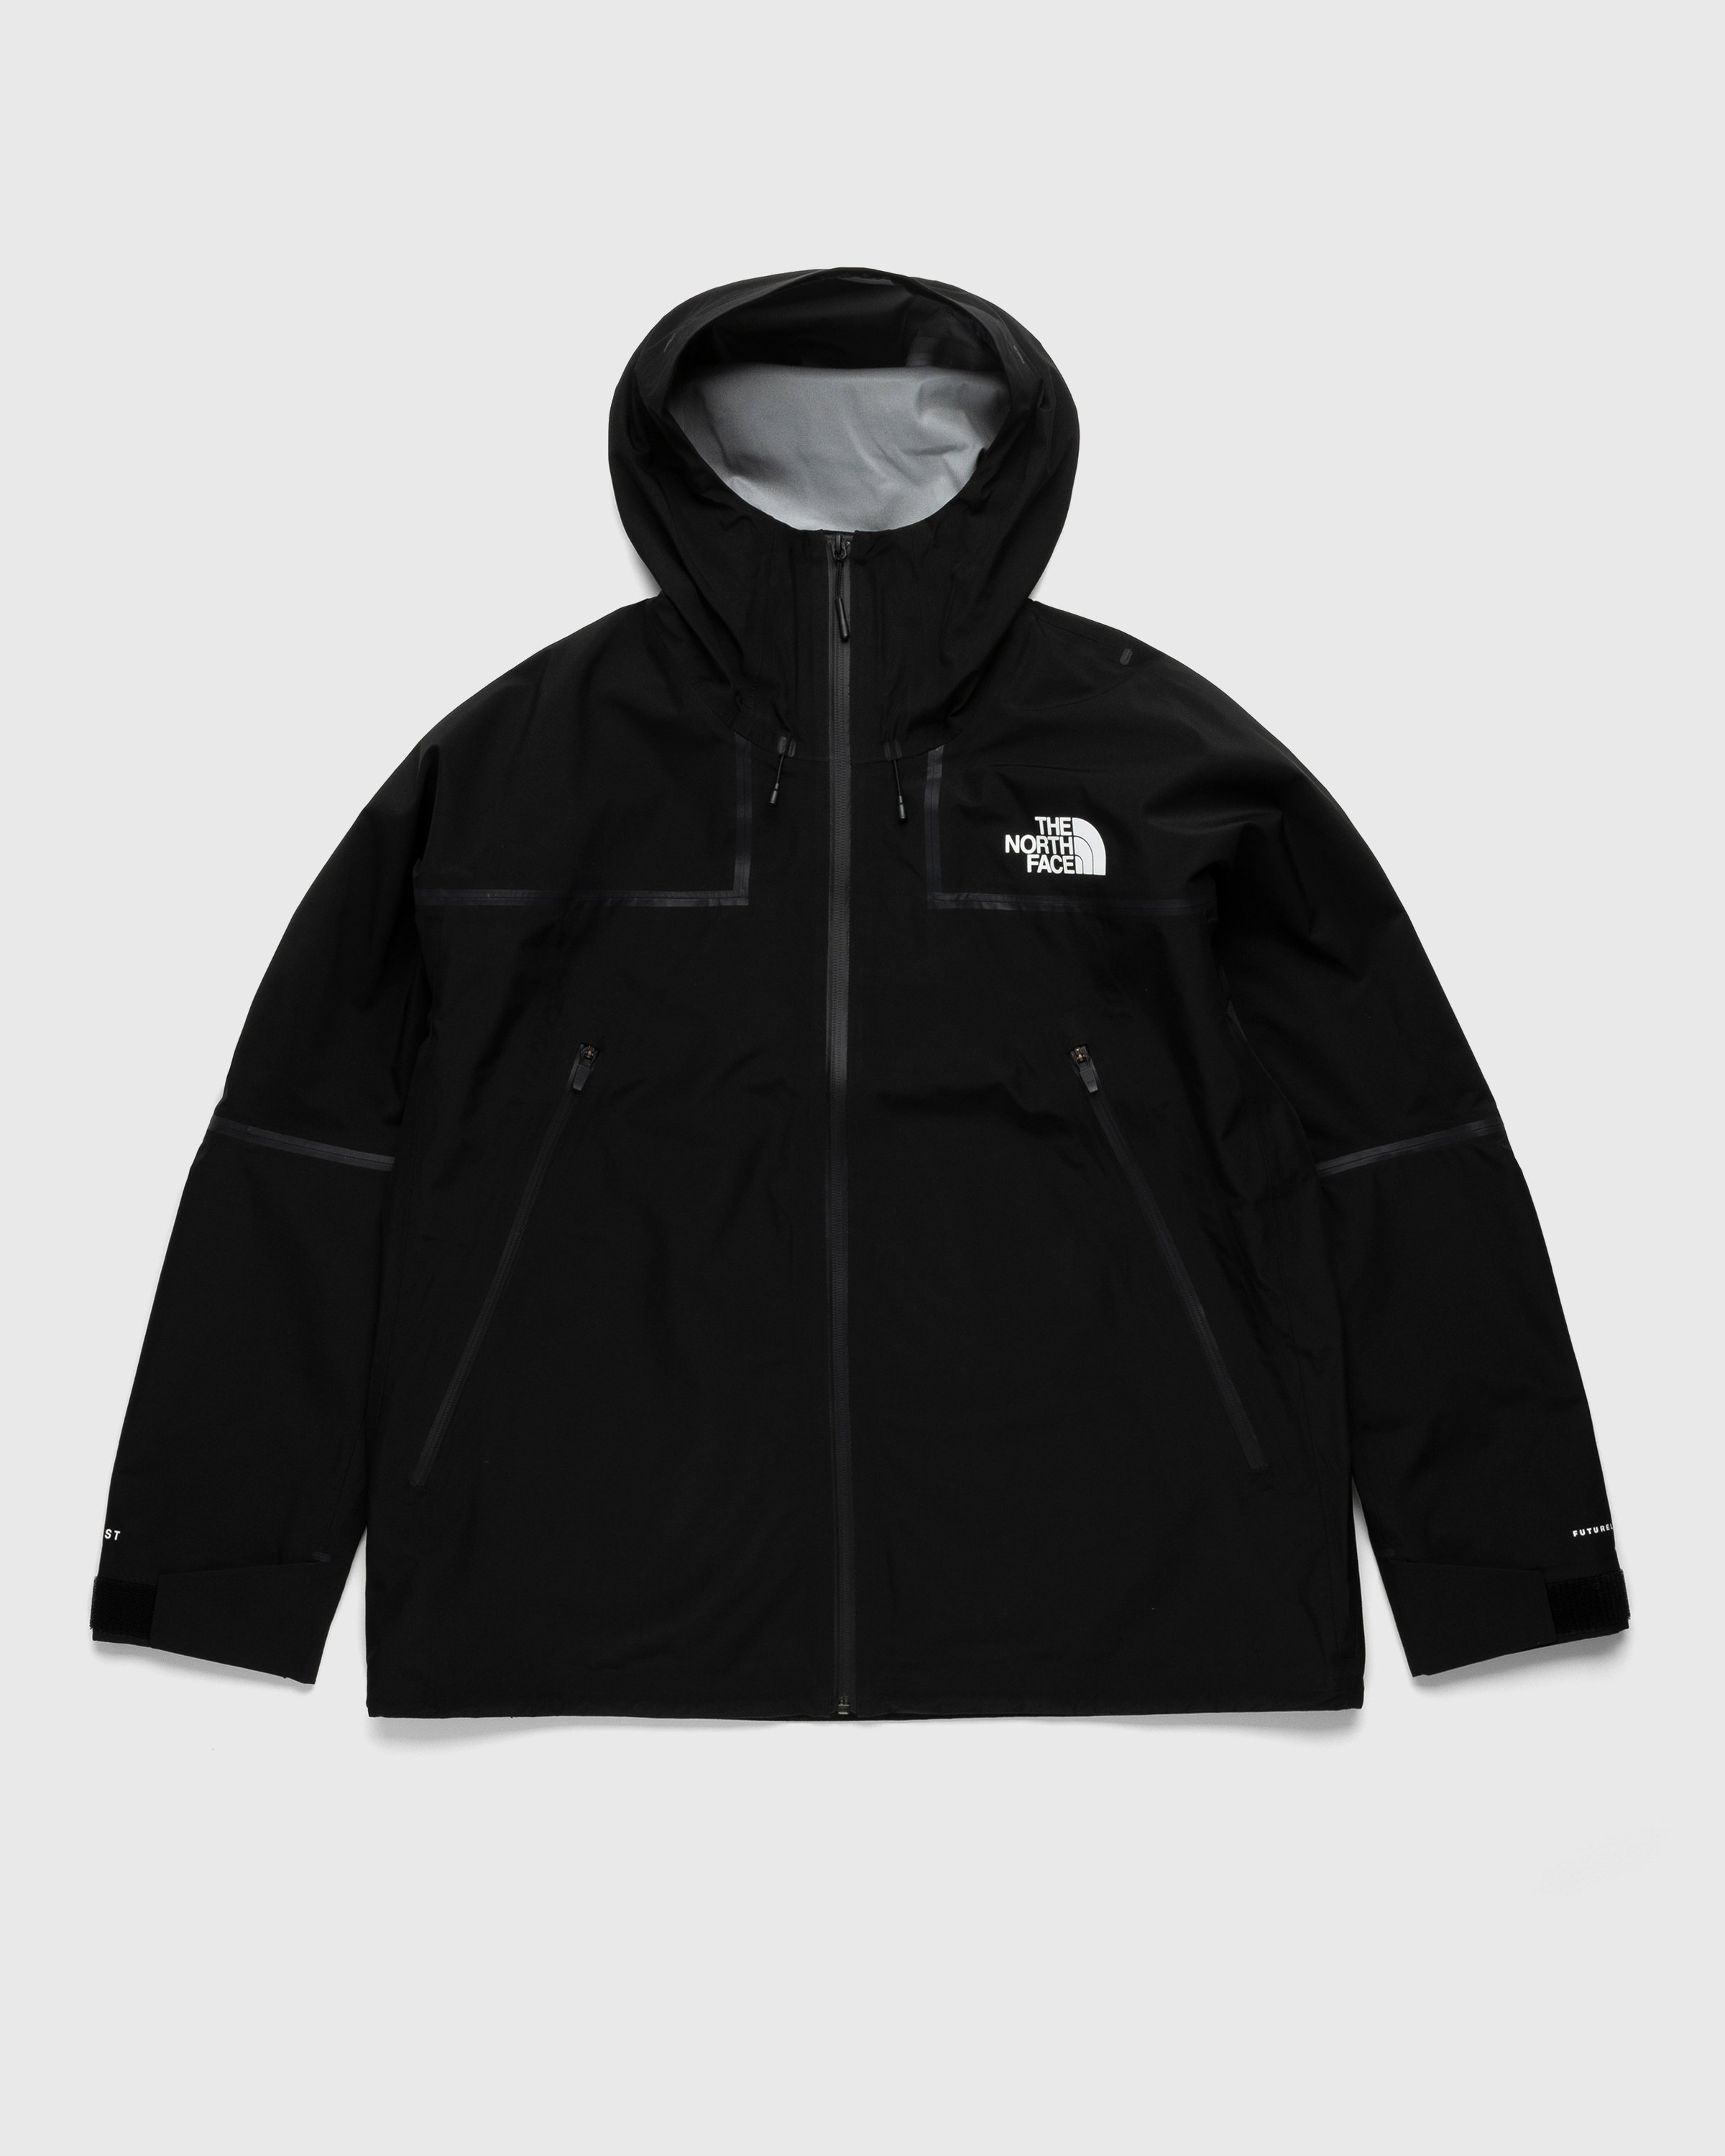 The North Face - RMST Mountain Light Futurelight Triclimate Jacket Black - Clothing - Black - Image 1